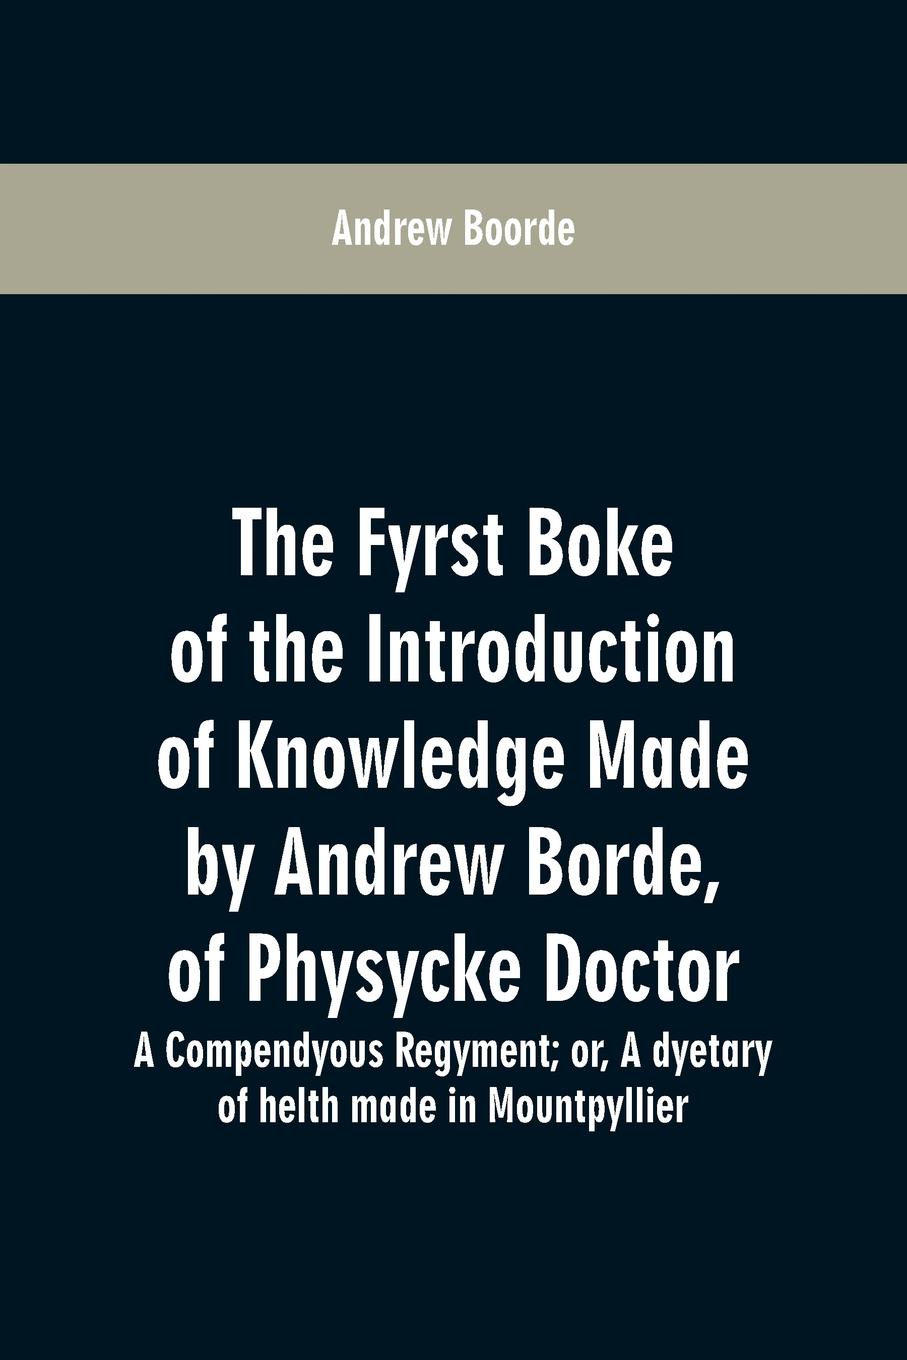 The fyrst boke of the introduction of knowledge made by Andrew Borde, of physycke doctor. A compendyous regyment. or, A dyetary of helth made in Mountpyllier